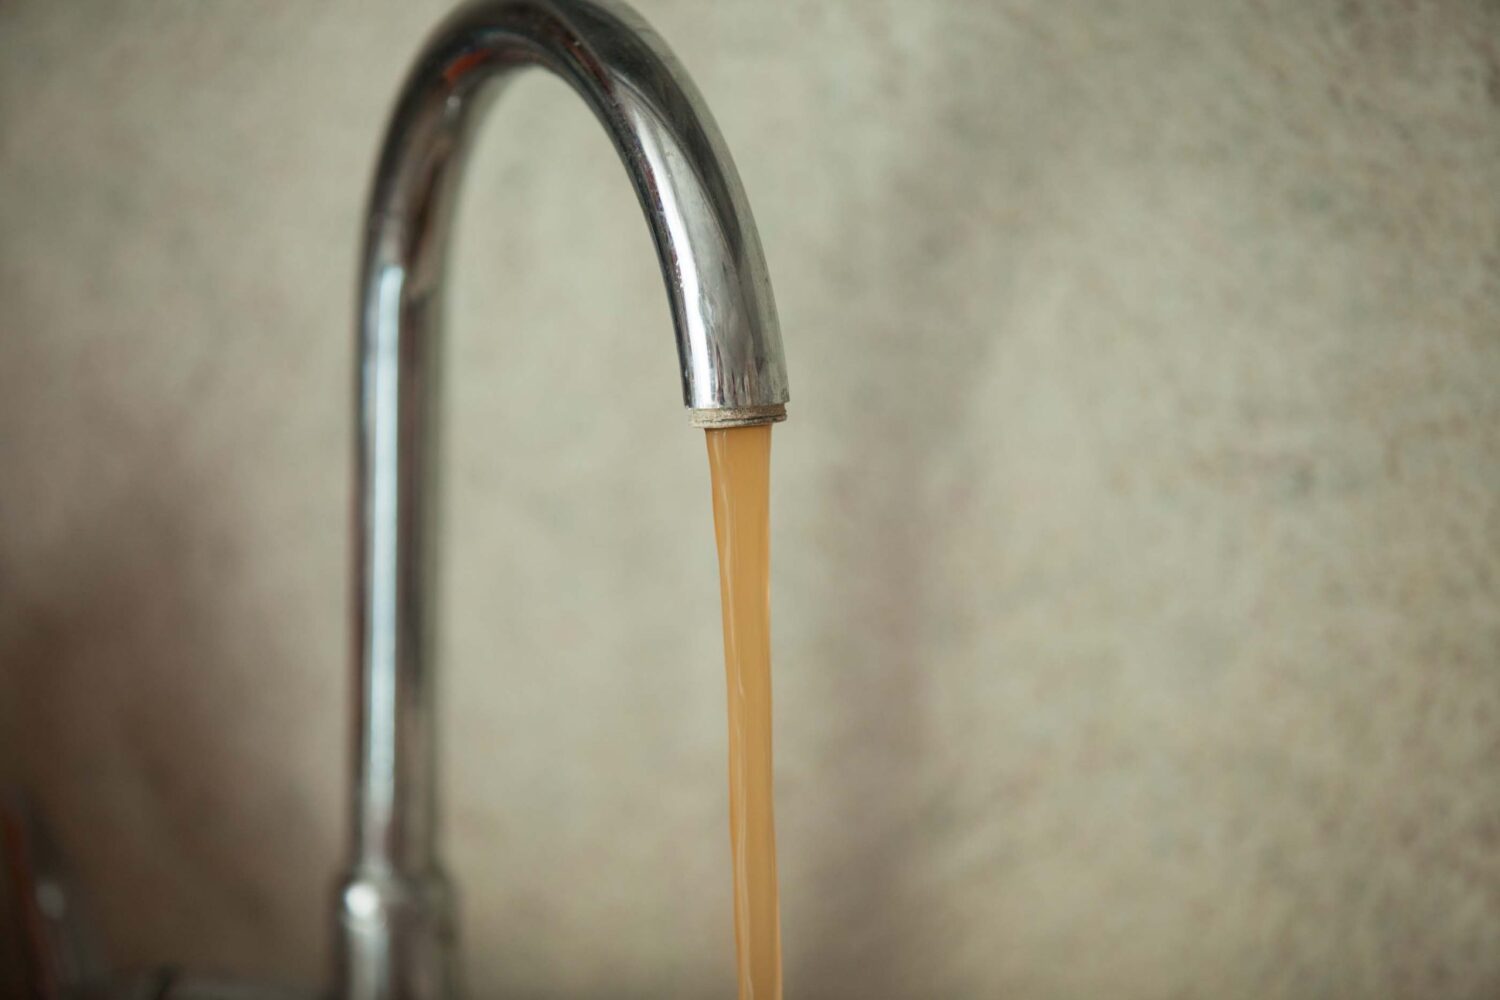 Dirty, Rusty Water Flows From The Tap